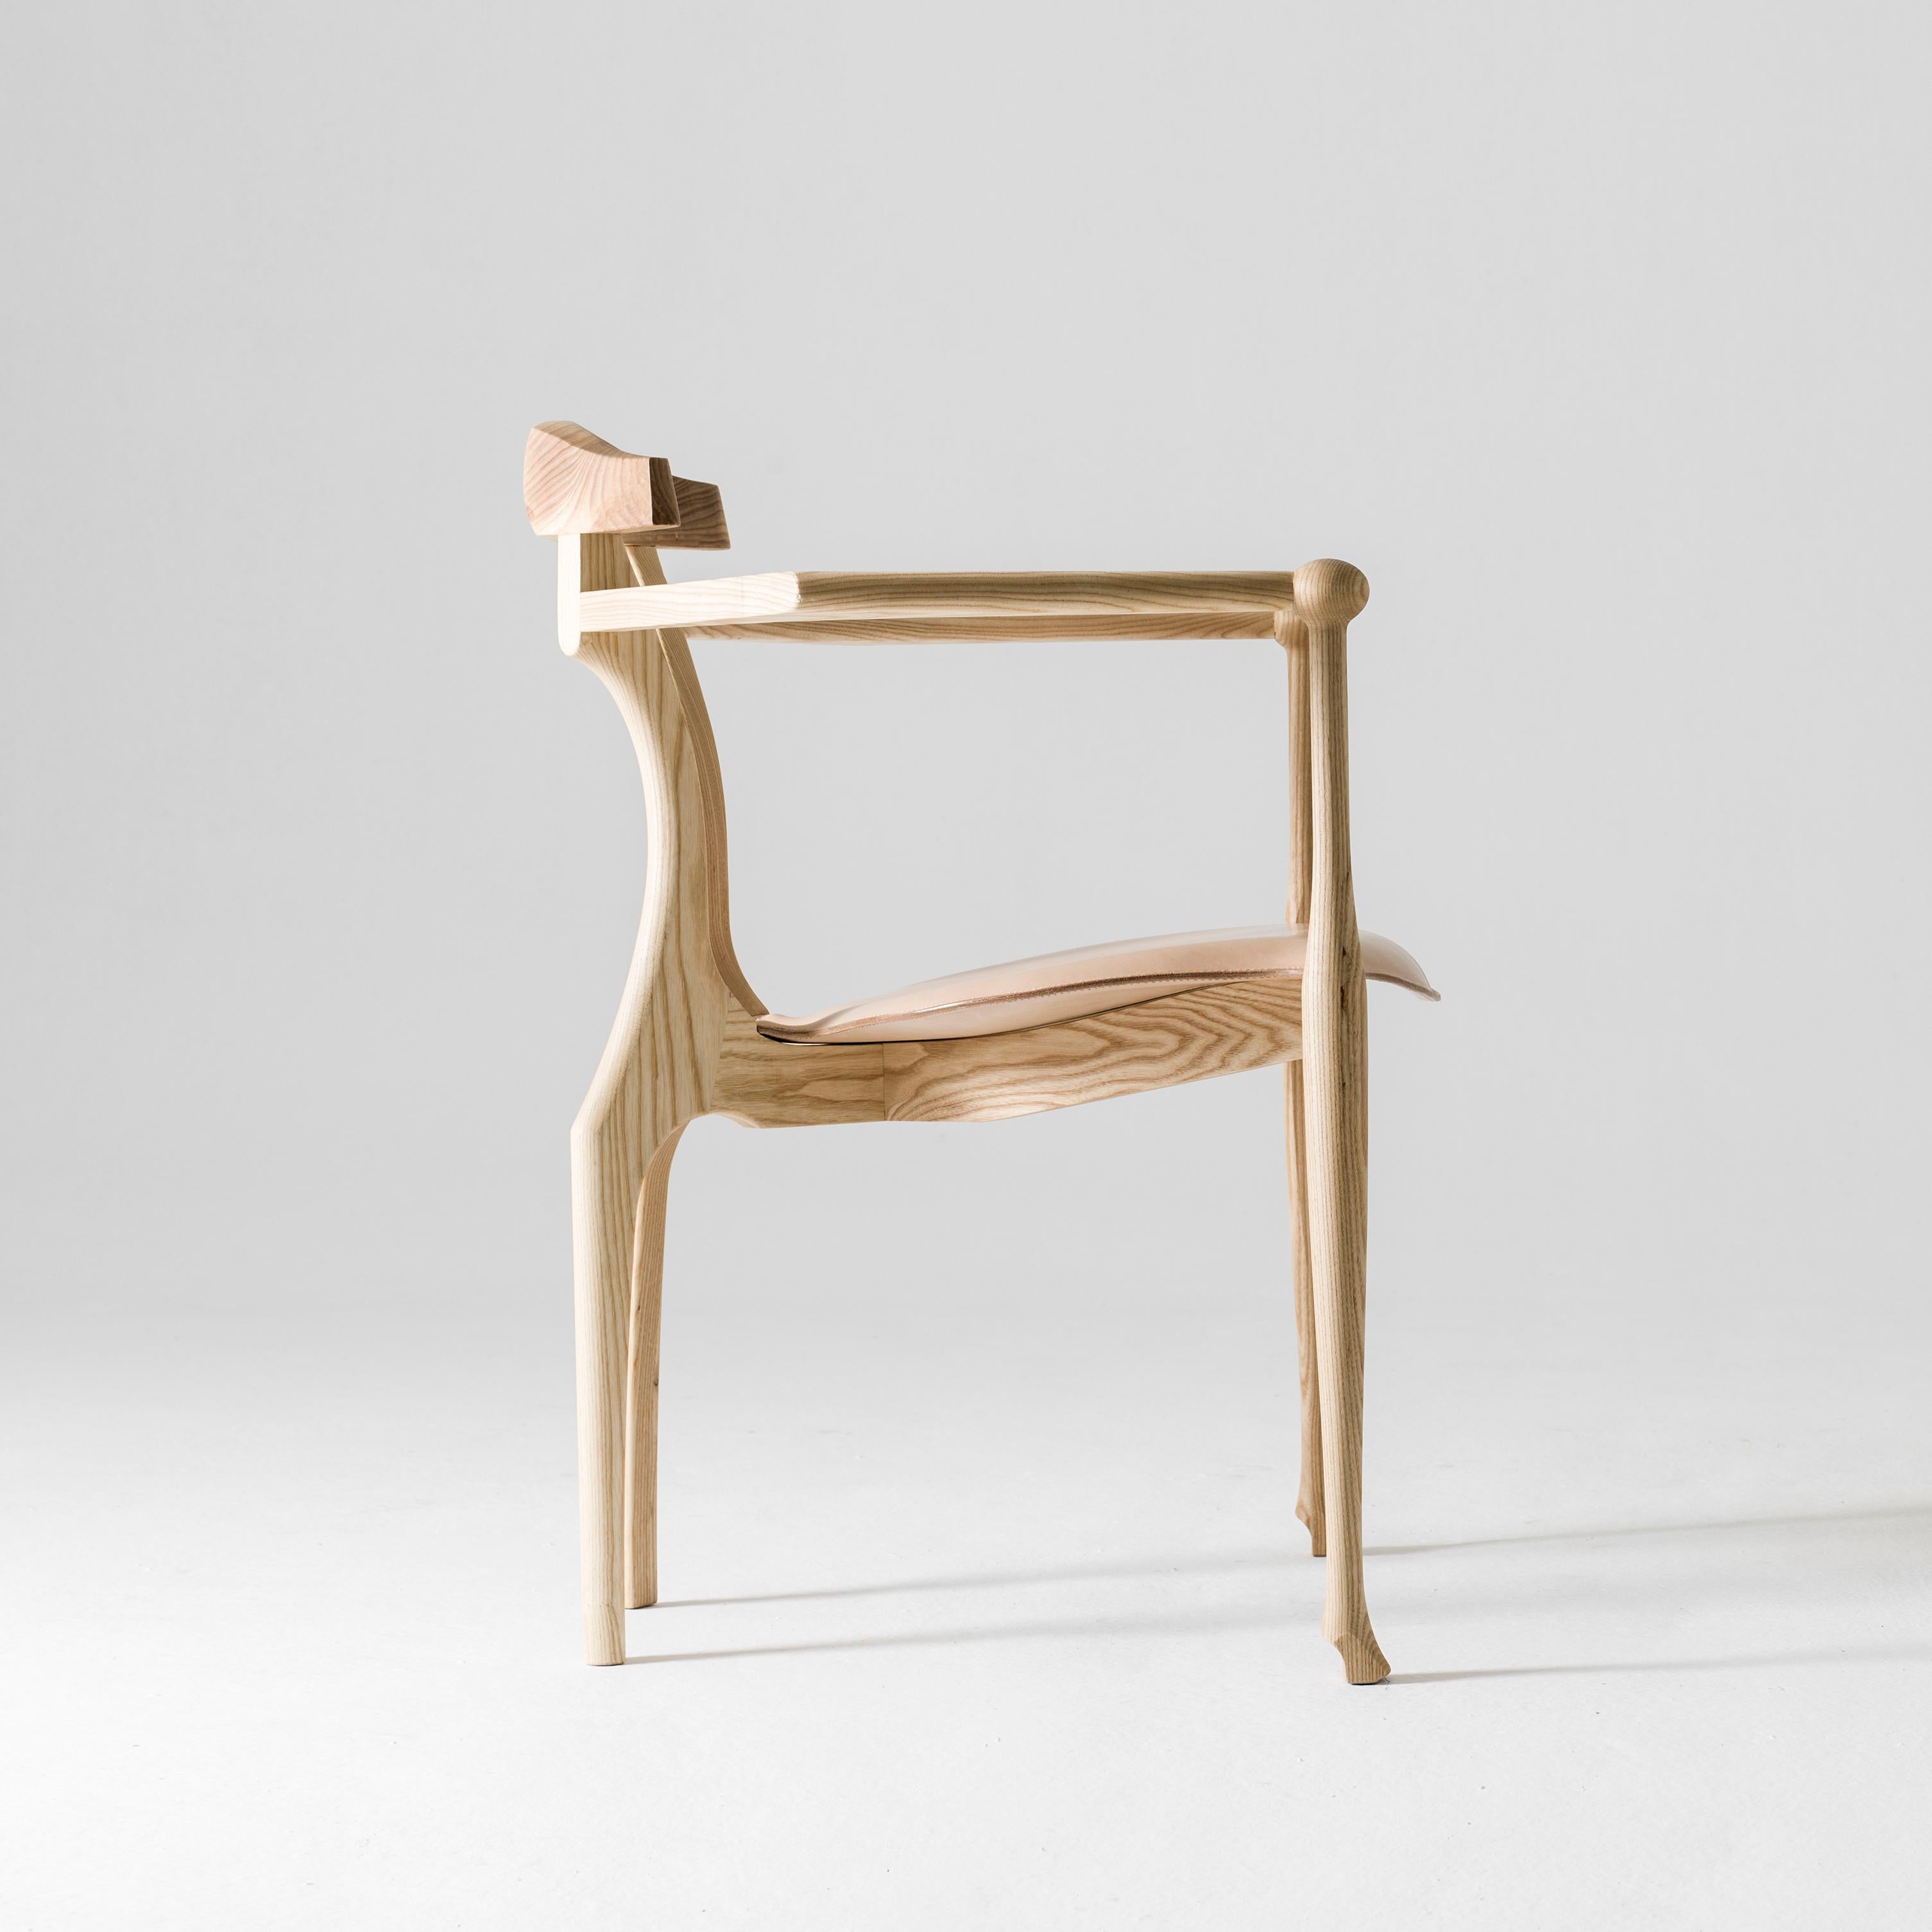 Gaulino easy chair designed by Oscar Tusquets manufactured by BD barcelona design, circa 2010.

Solid natural varnished ash with seat in natural hide

Gaulino chair which, designed in 1987, was selected for the Industrial Design Prize and